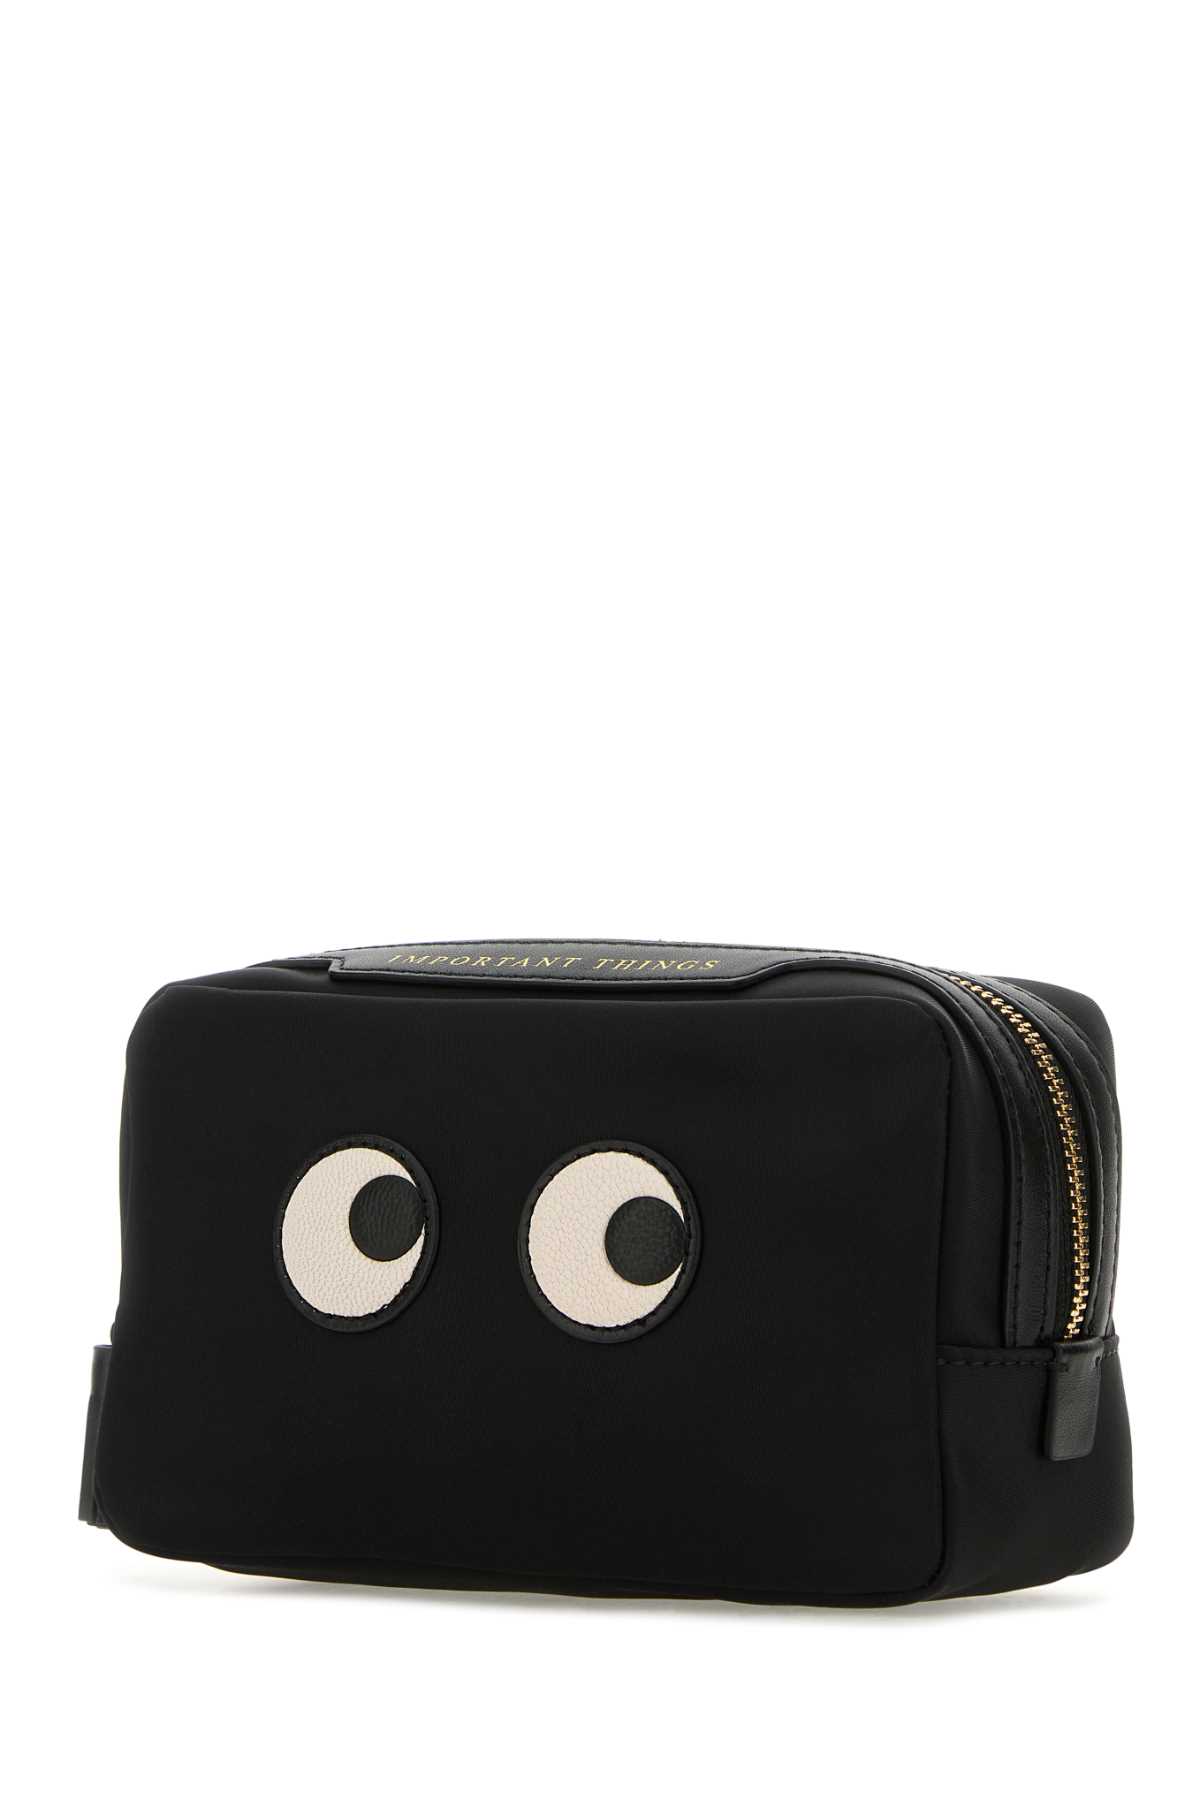 ANYA HINDMARCH BLACK NYLON IMPORTANT THING POUCH